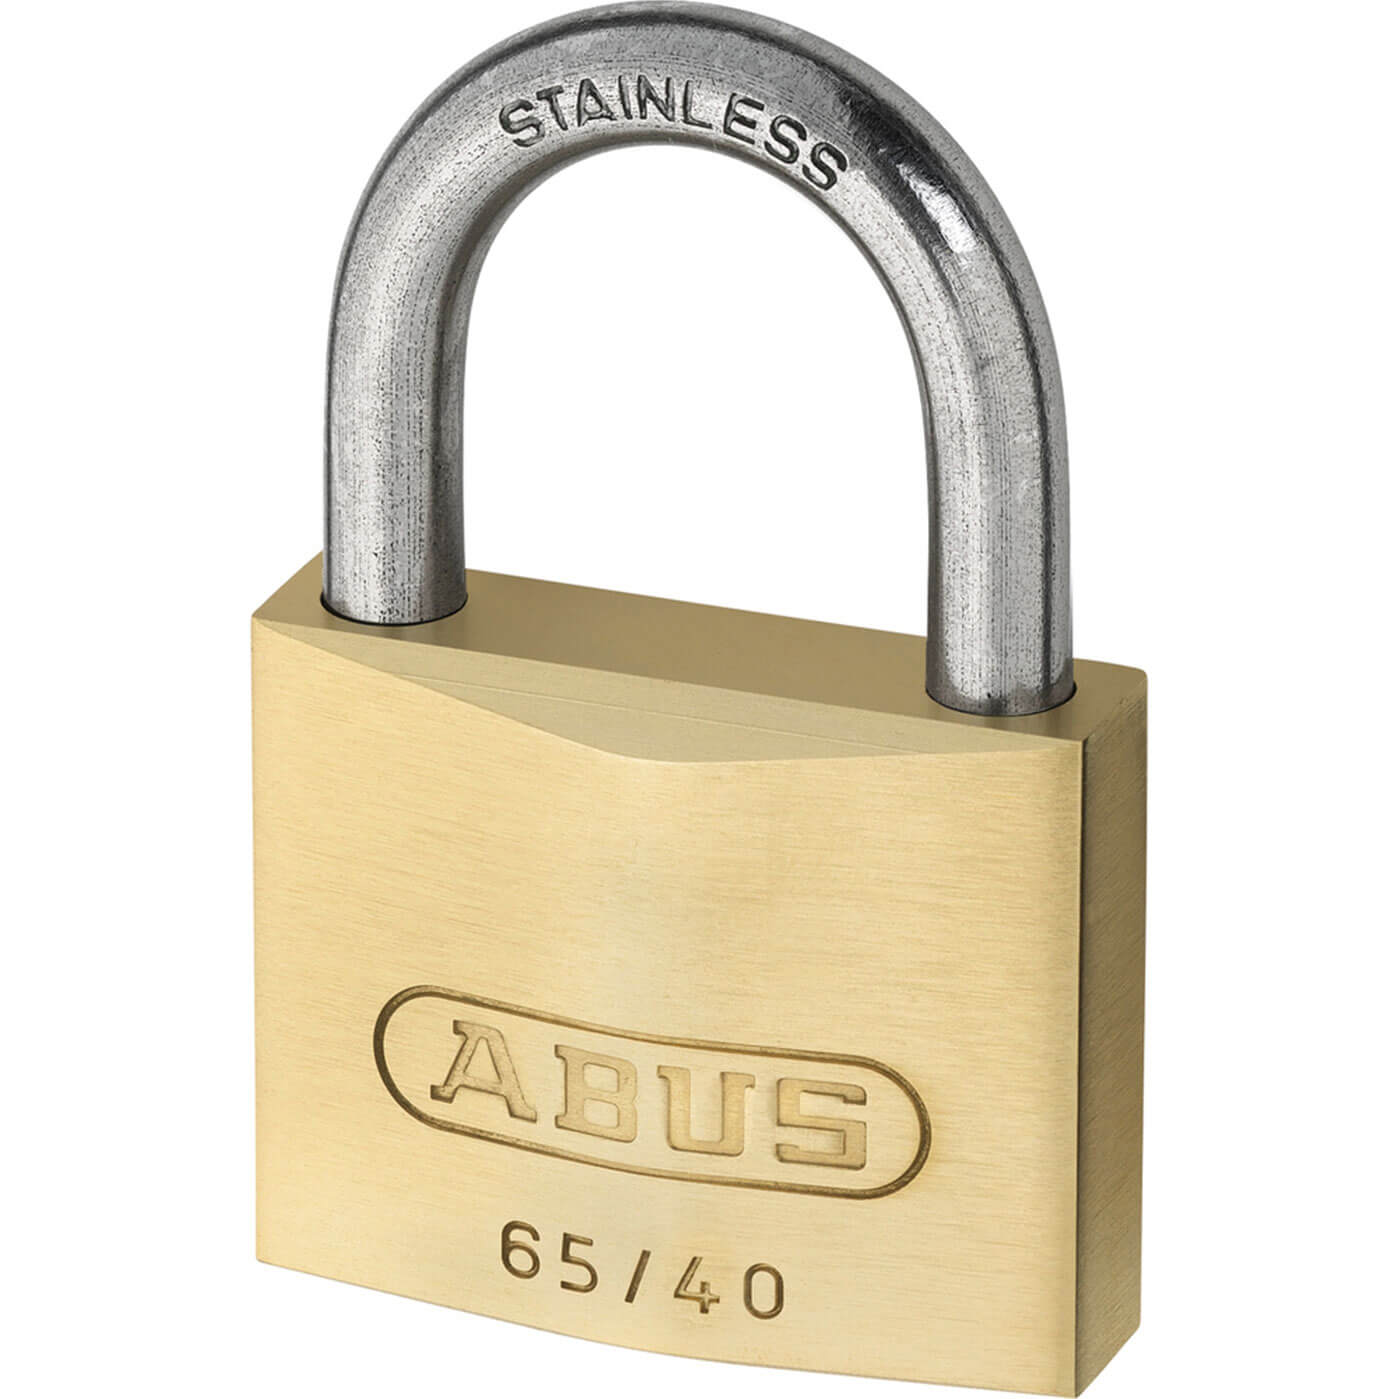 Image of Abus 40mm 65 Series Compact Brass Padlock With Stainless Steel Shackle Keyed Alike To Suite 6405